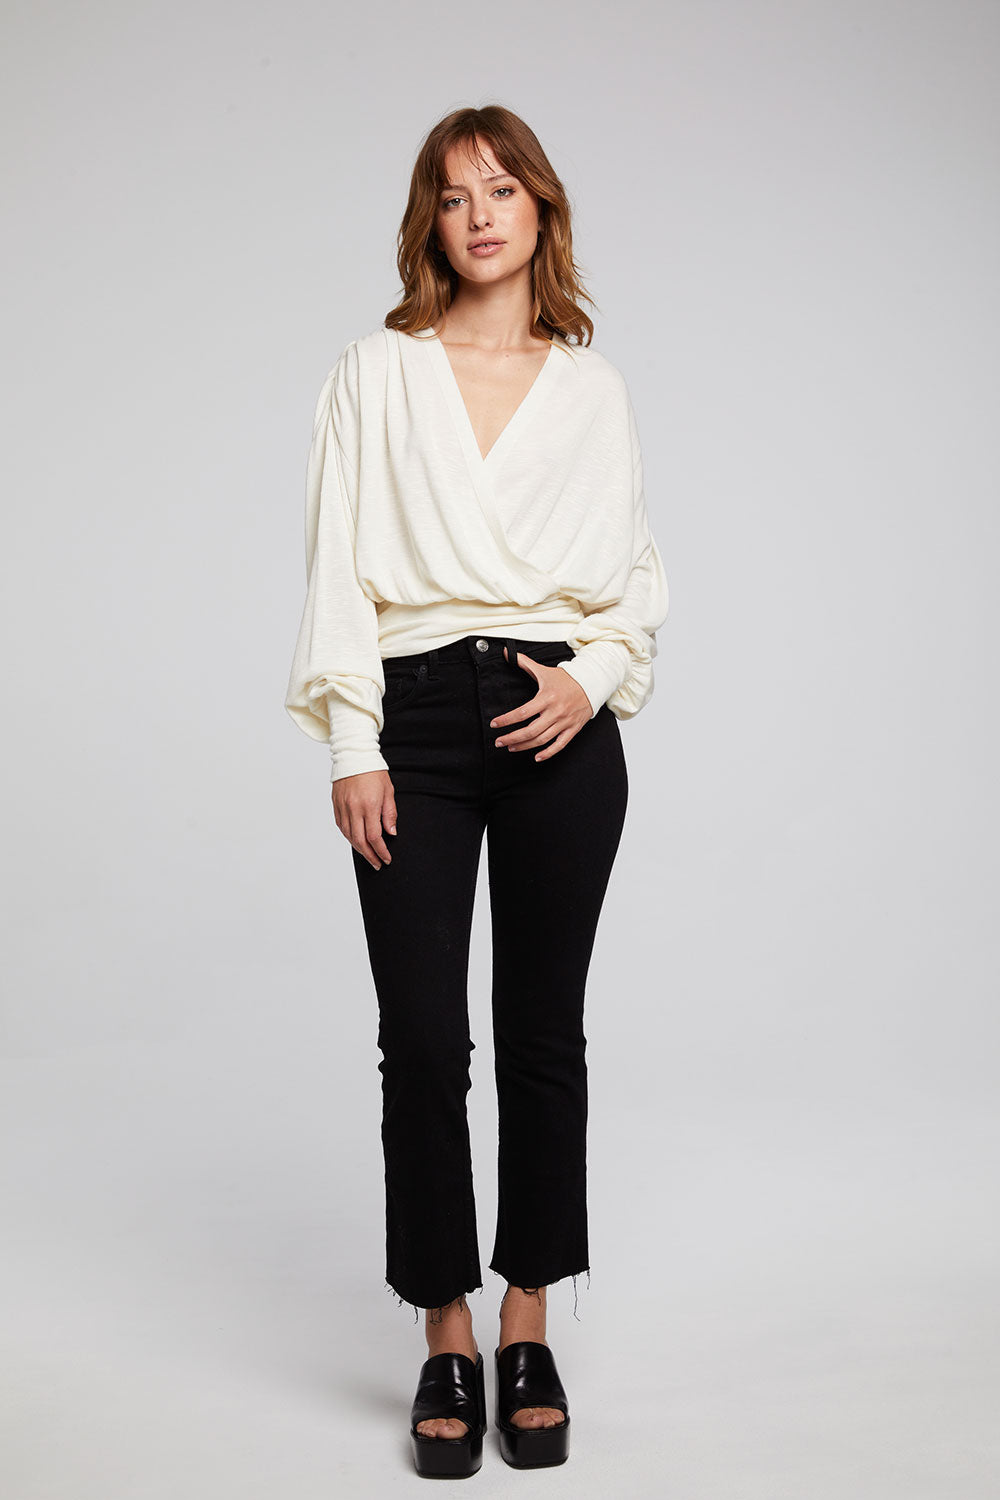 City Starry White Blouse WOMENS chaserbrand